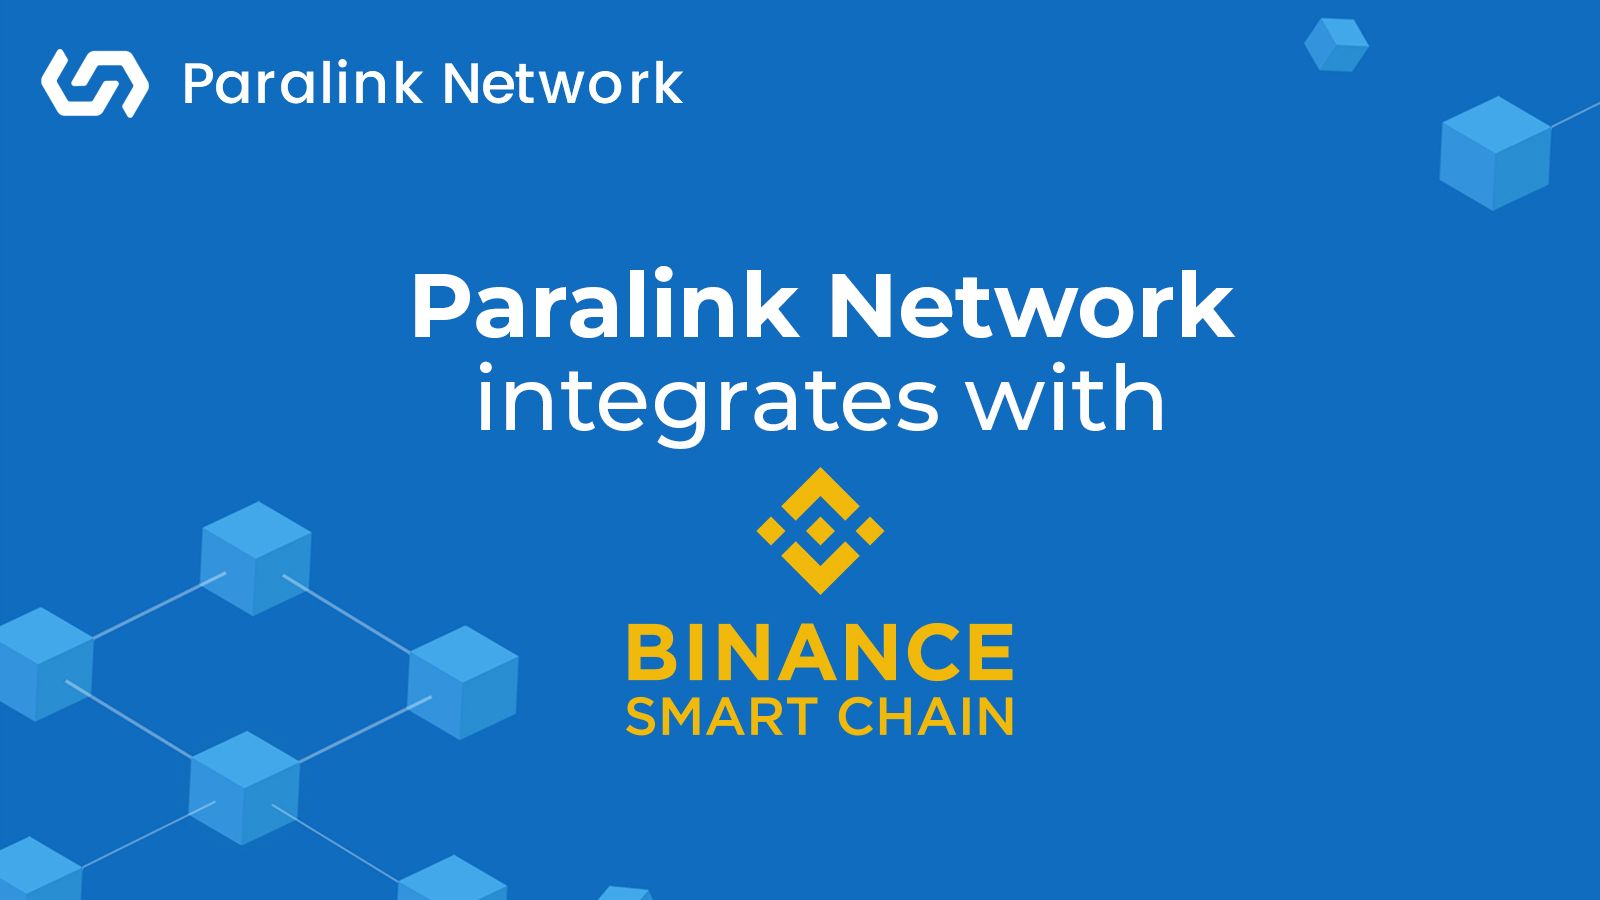 Paralink Network integrates with Binance Smart Chain